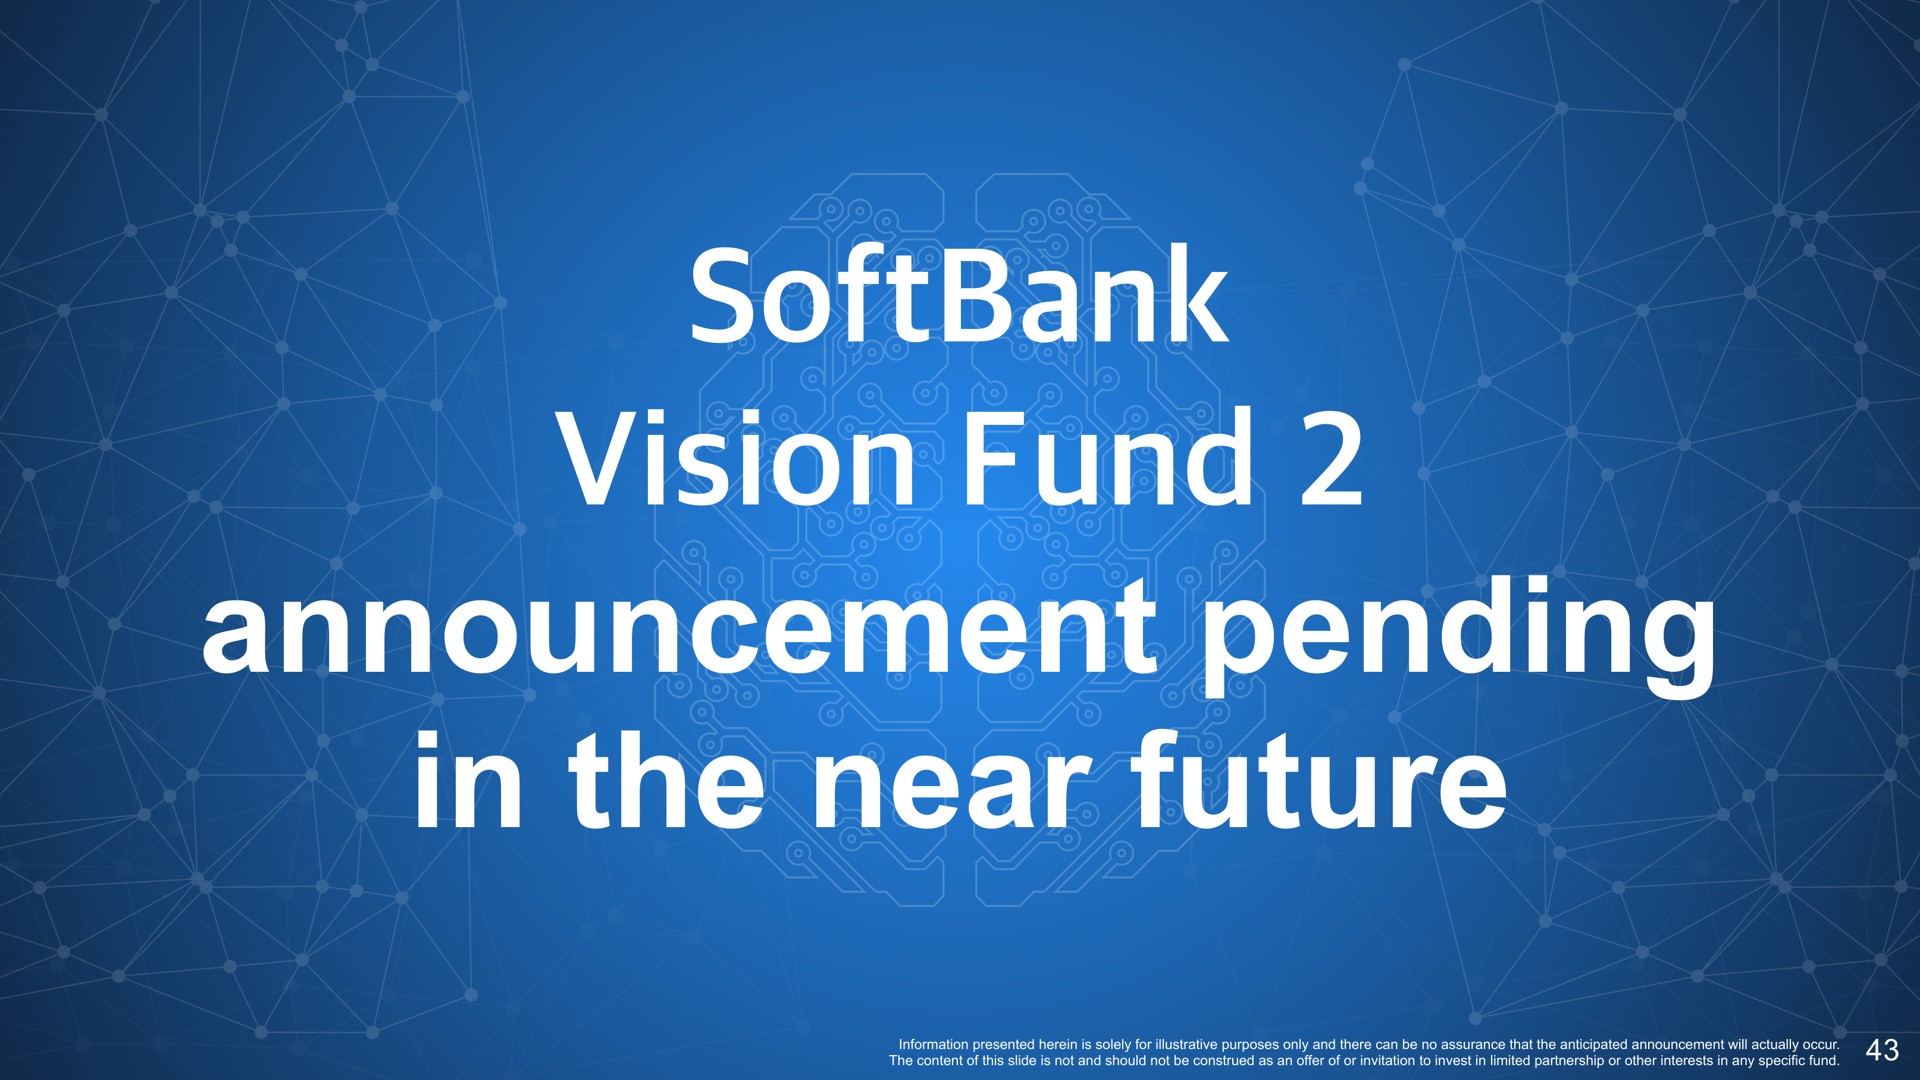 vision fund announcement pending in the near future | SoftBank